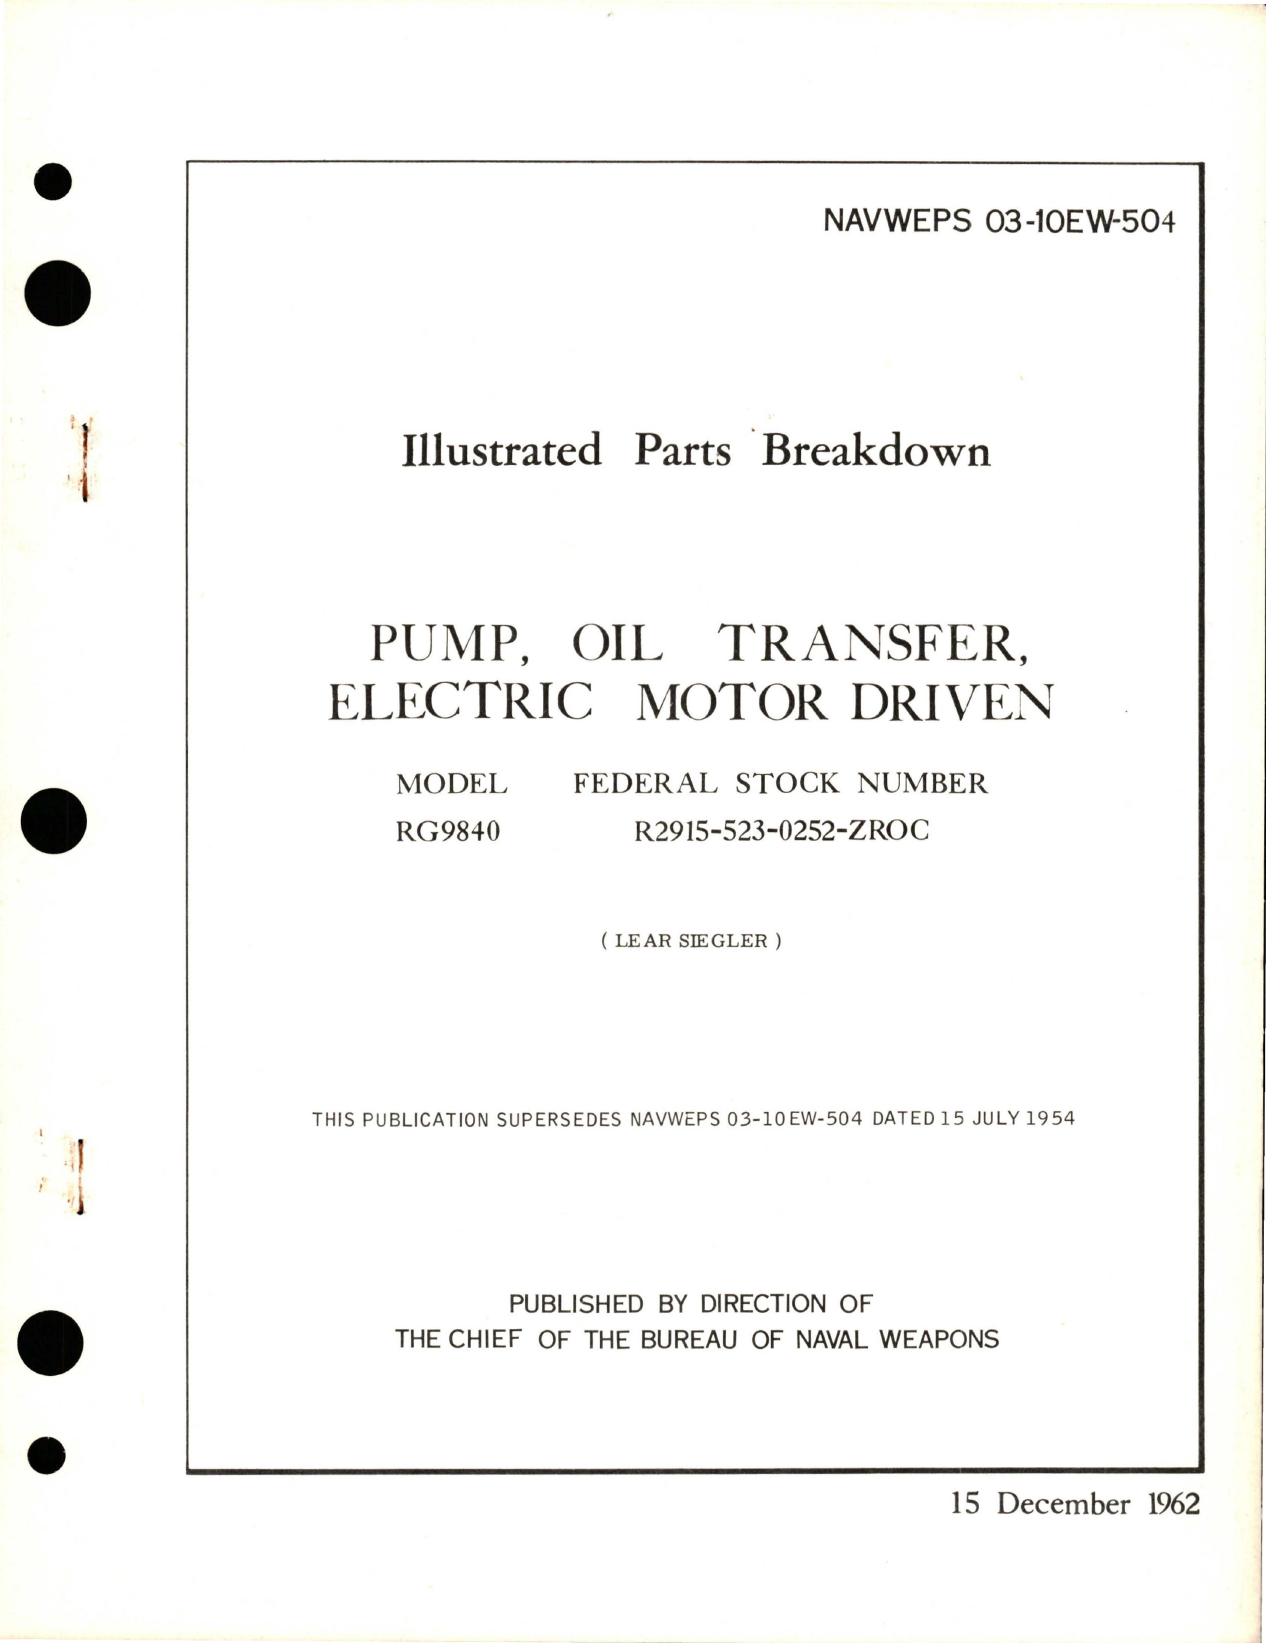 Sample page 1 from AirCorps Library document: Illustrated Parts Breakdown for Electric Motor Driven Oil Transfer Pump - Model RG9840